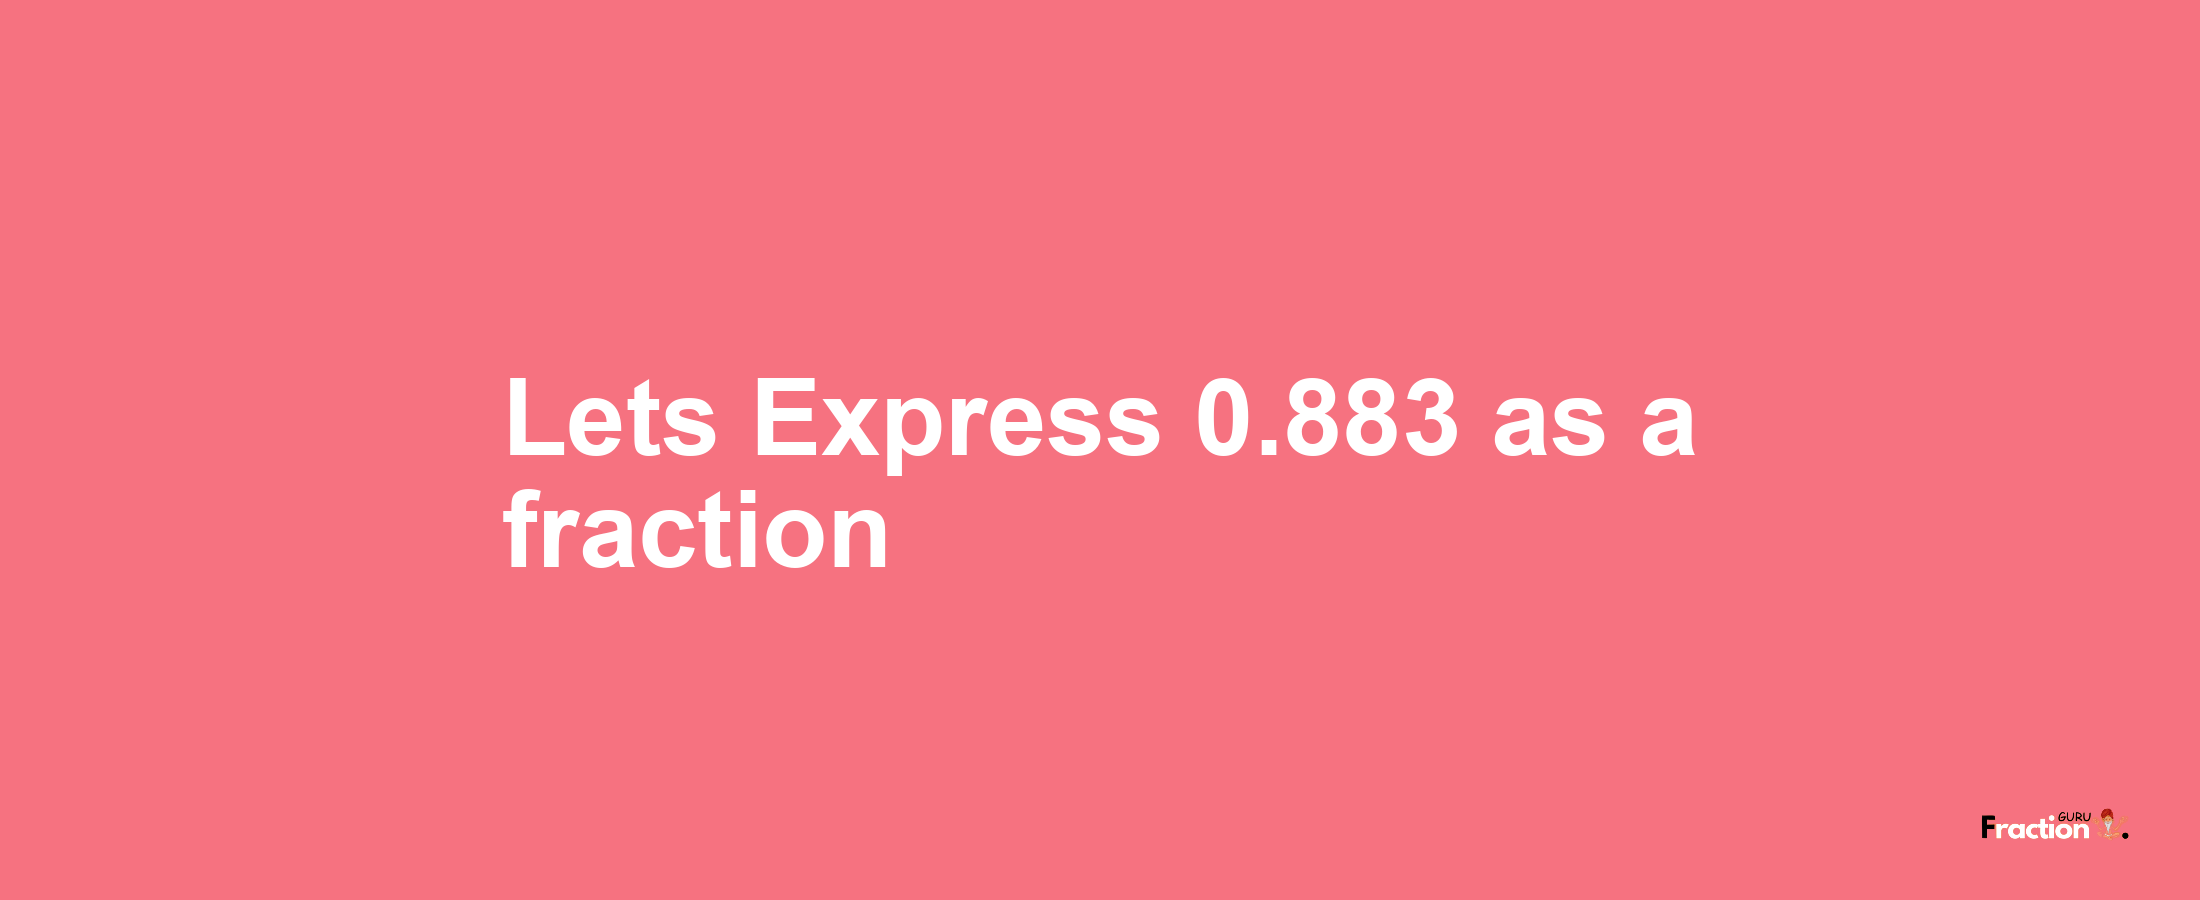 Lets Express 0.883 as afraction